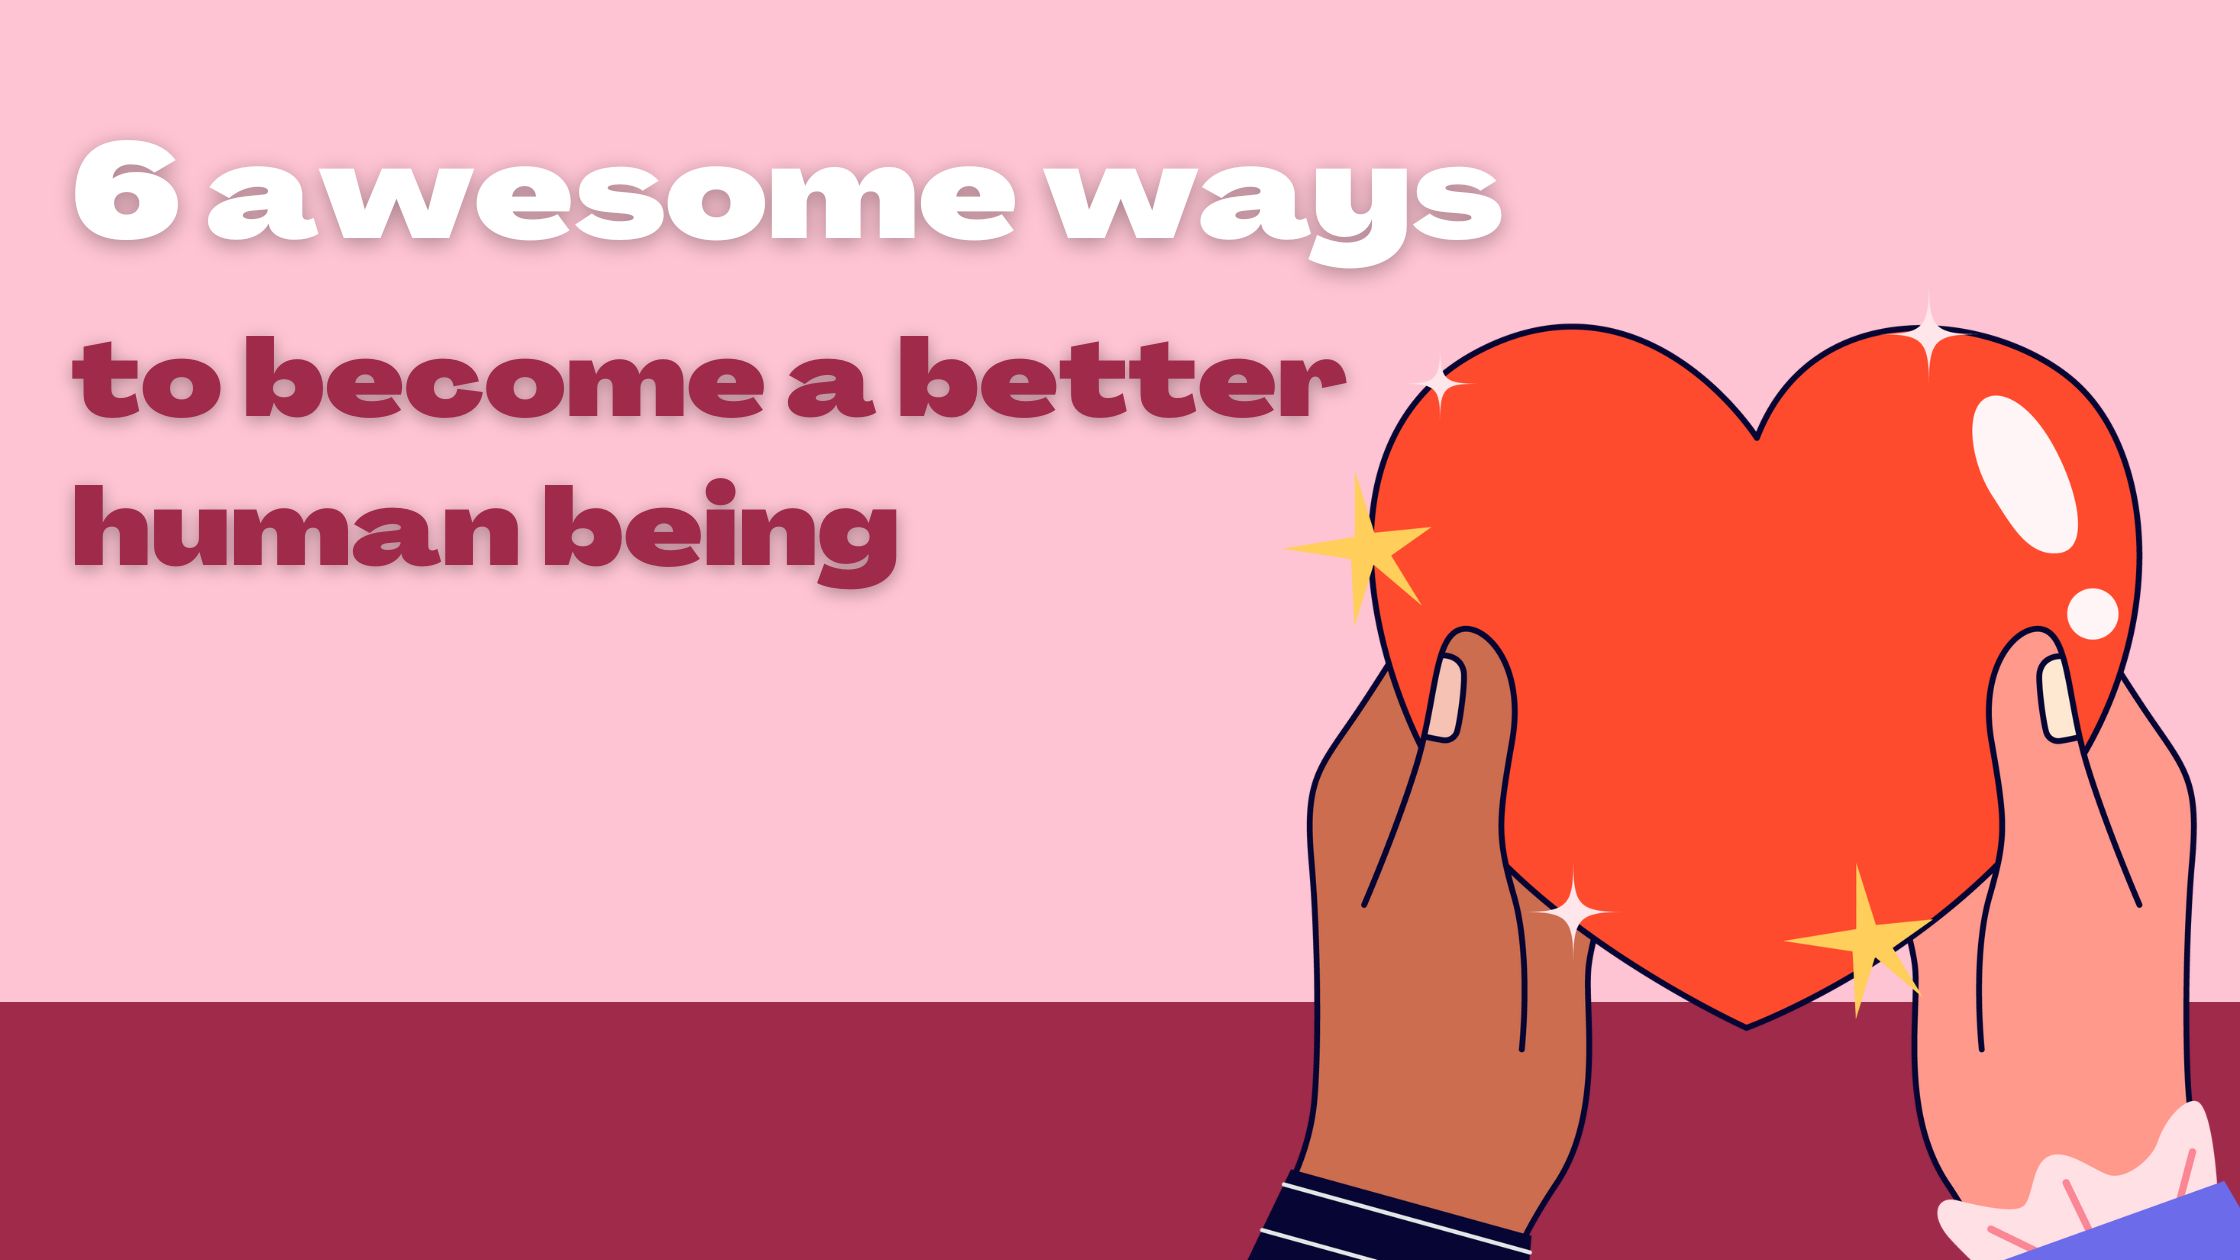 6 awesome ways to become a better human being